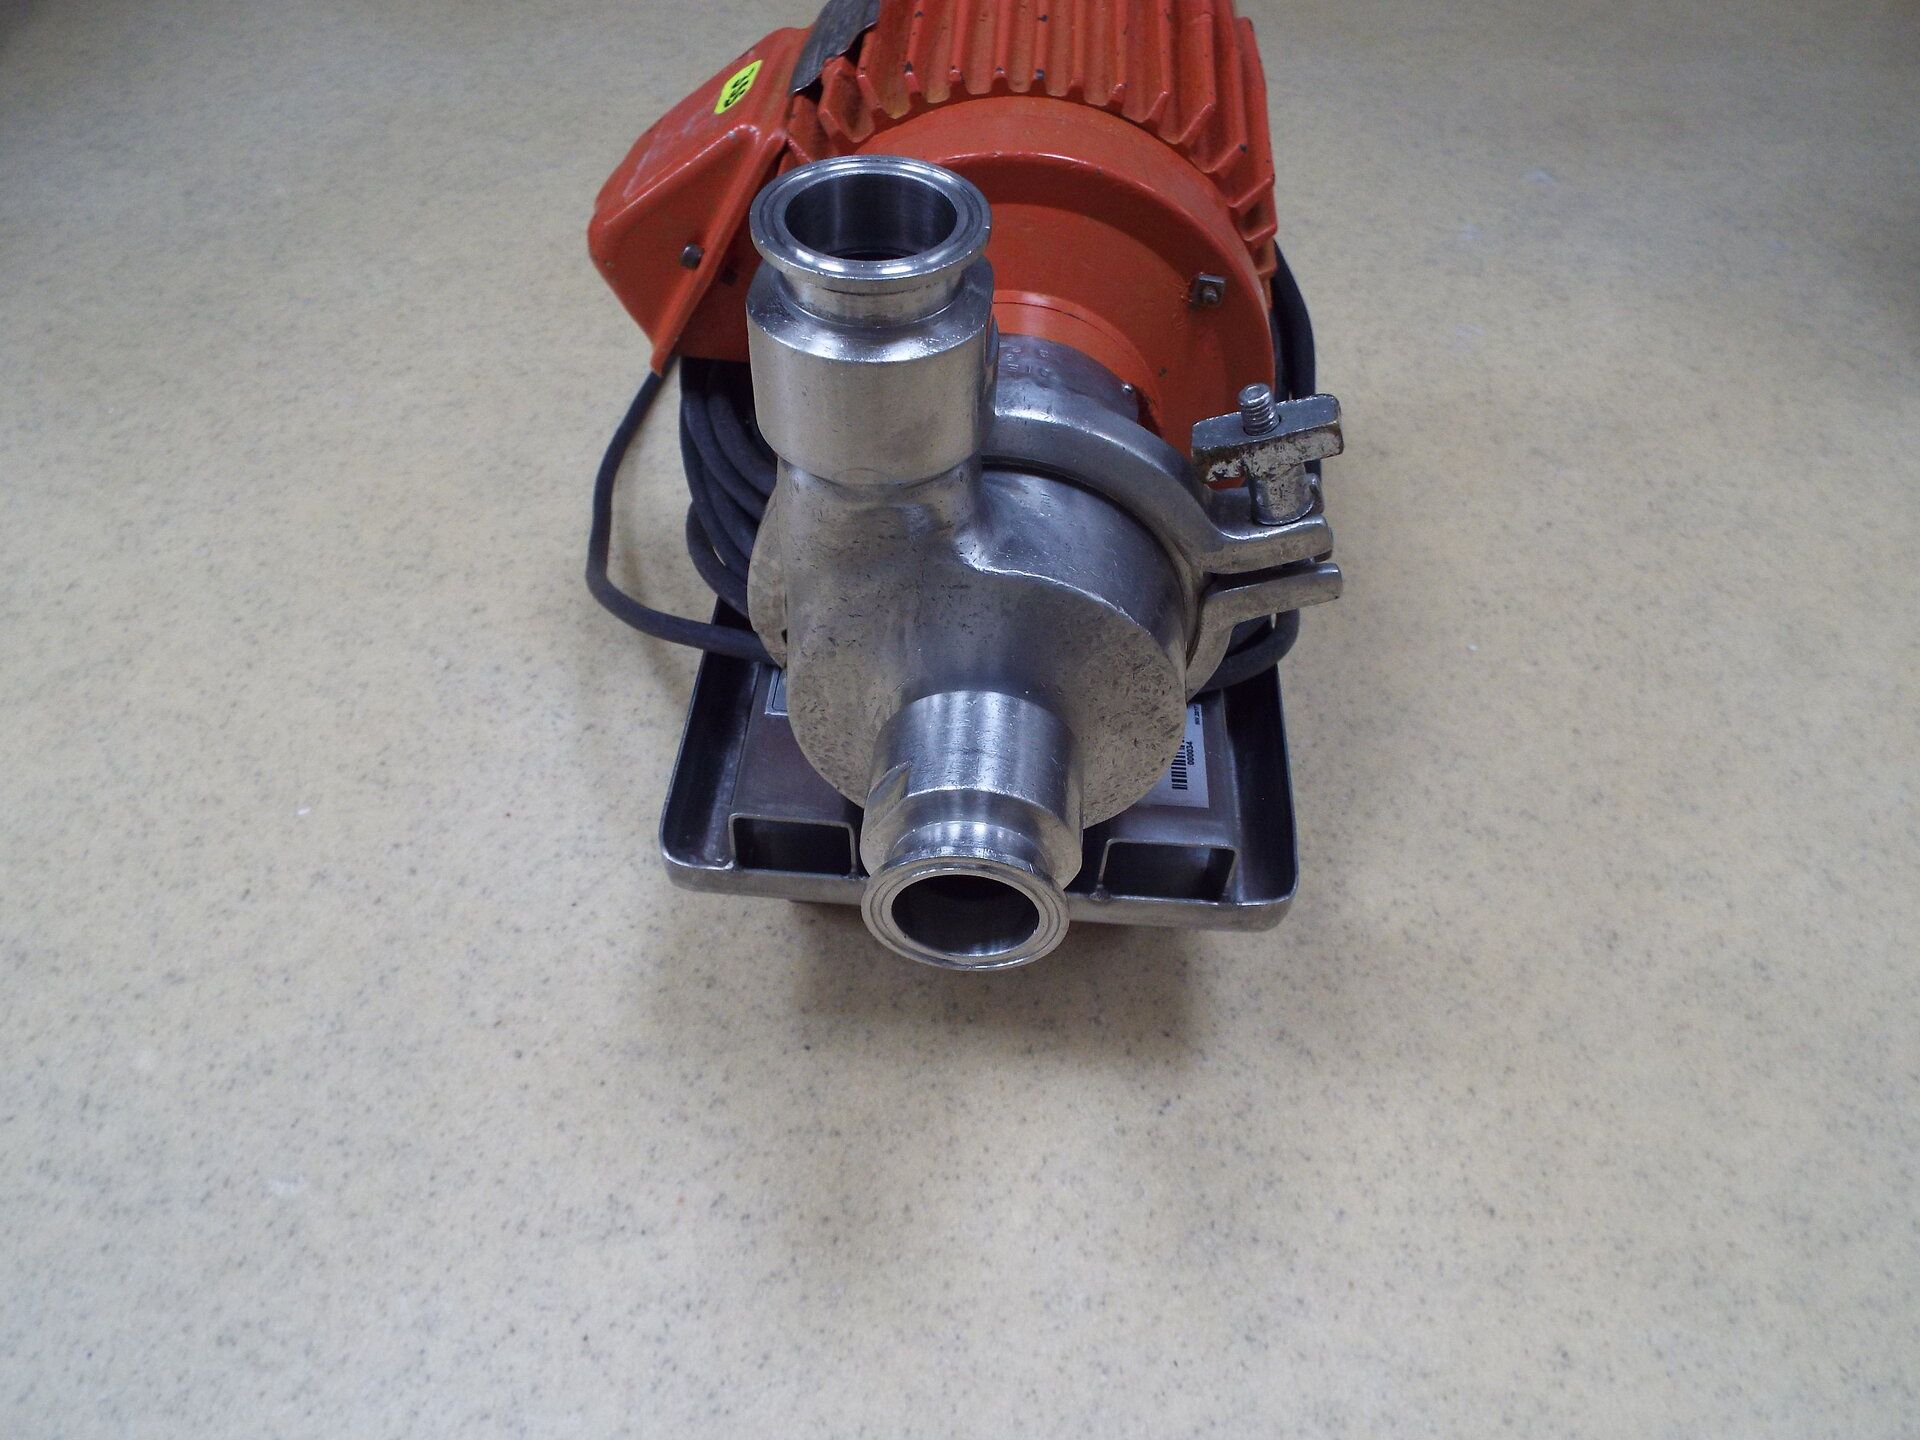 1 HP stainless steel centrifgual pump with 4" diameter impeller stainless steel base on casters - Image 2 of 2